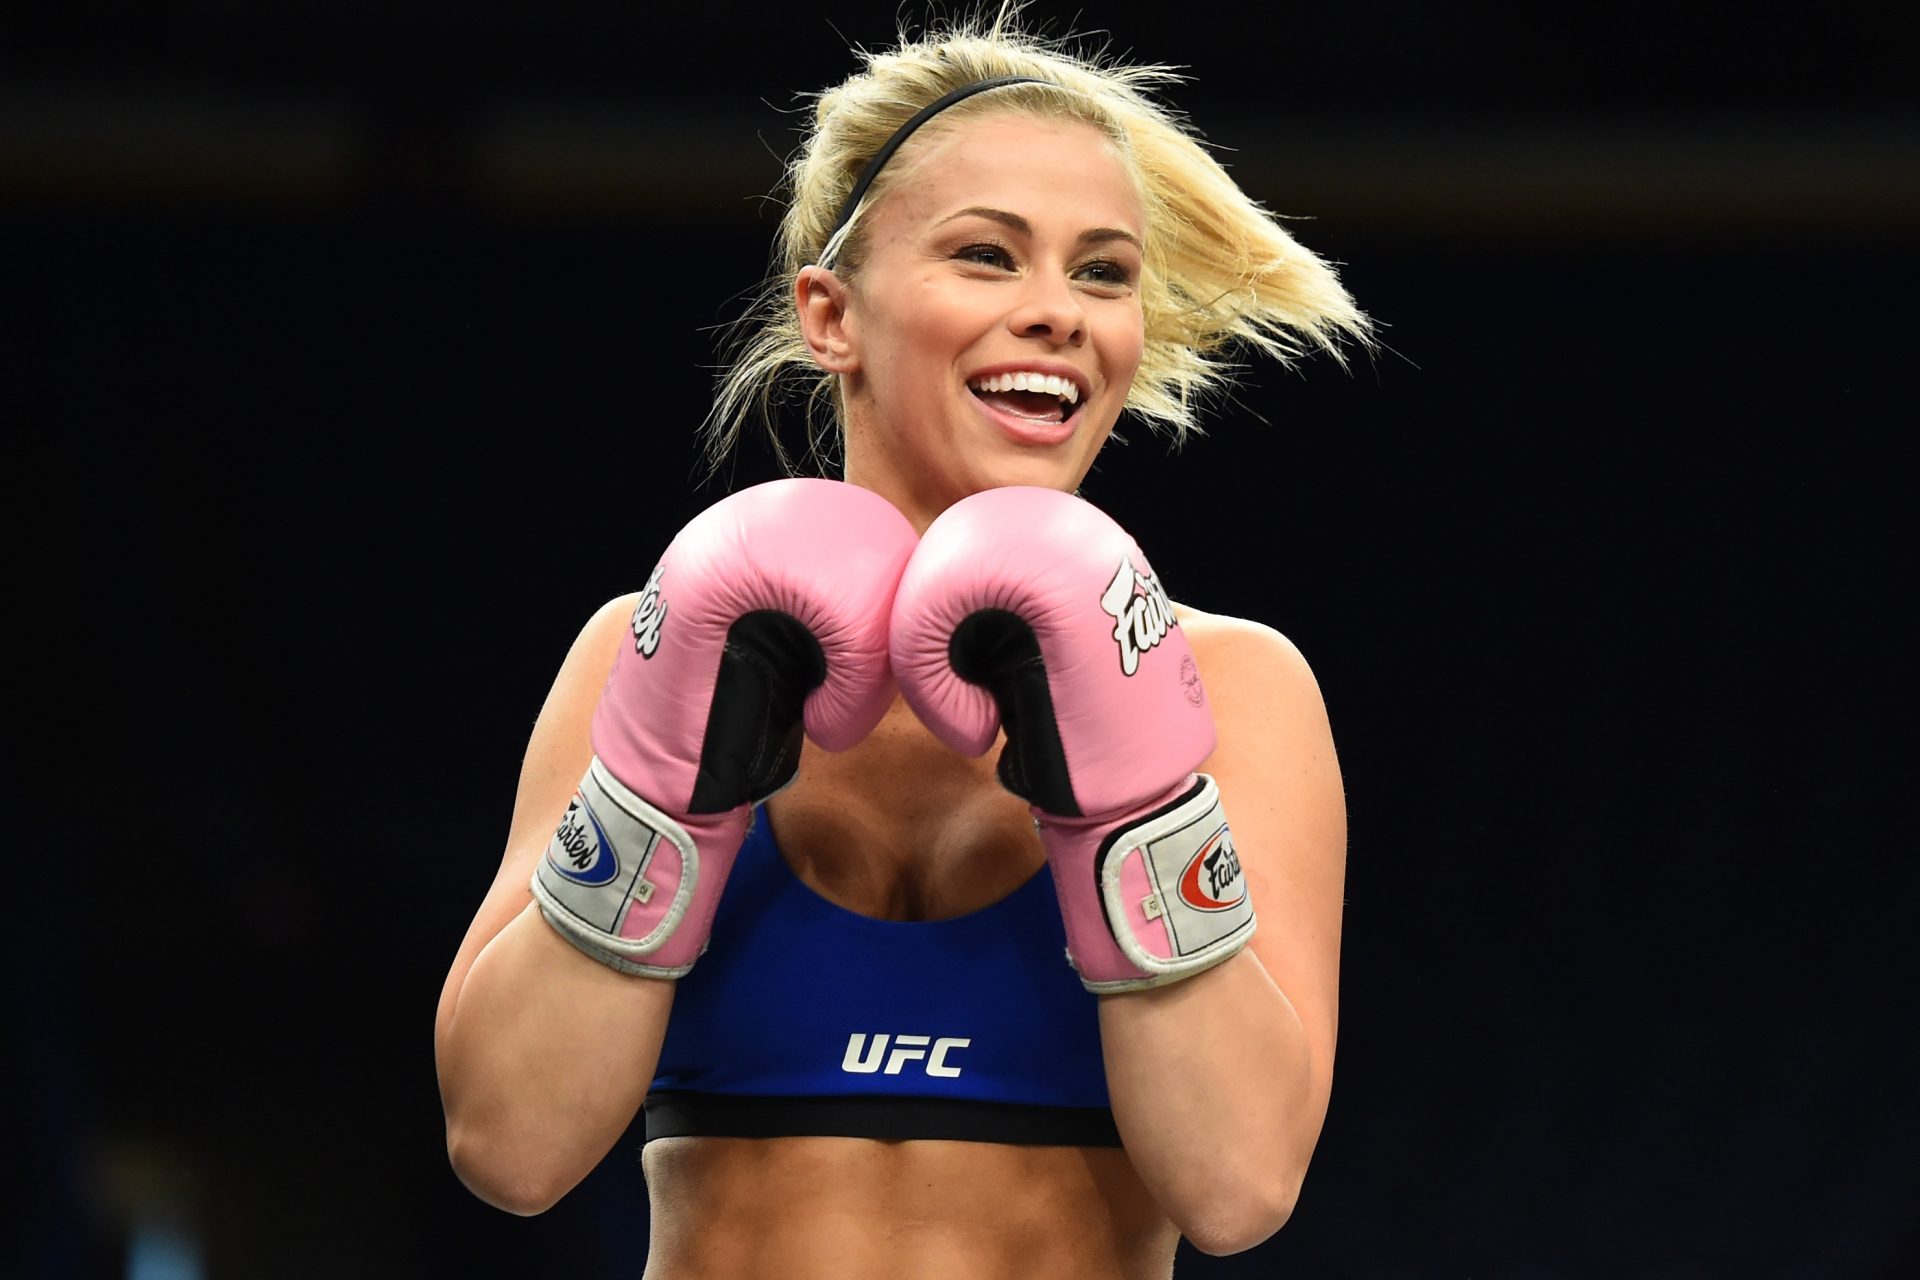 Ex-UFC Star Paige VanZant makes a shocking confession about her fighting career